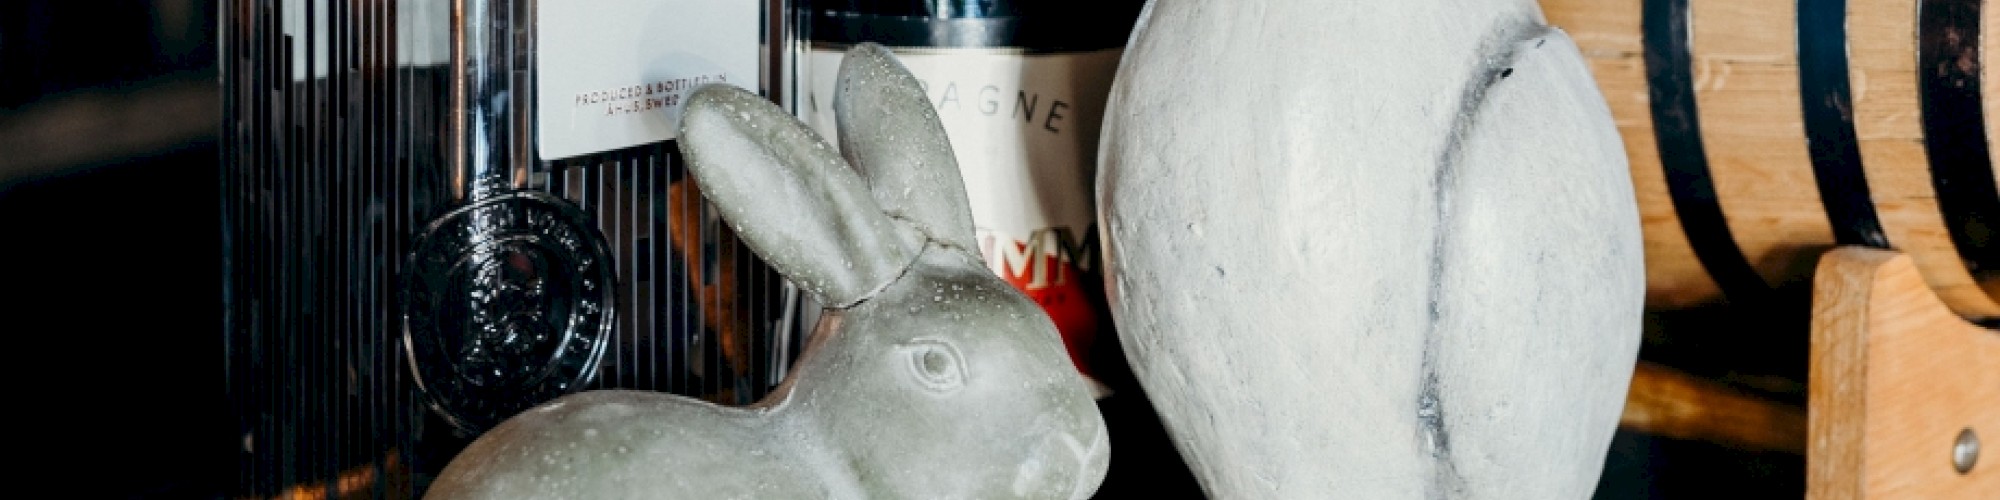 The image shows two rabbit statues, a bottle of gin, a bottle of Champagne, and a small wooden barrel on a table.